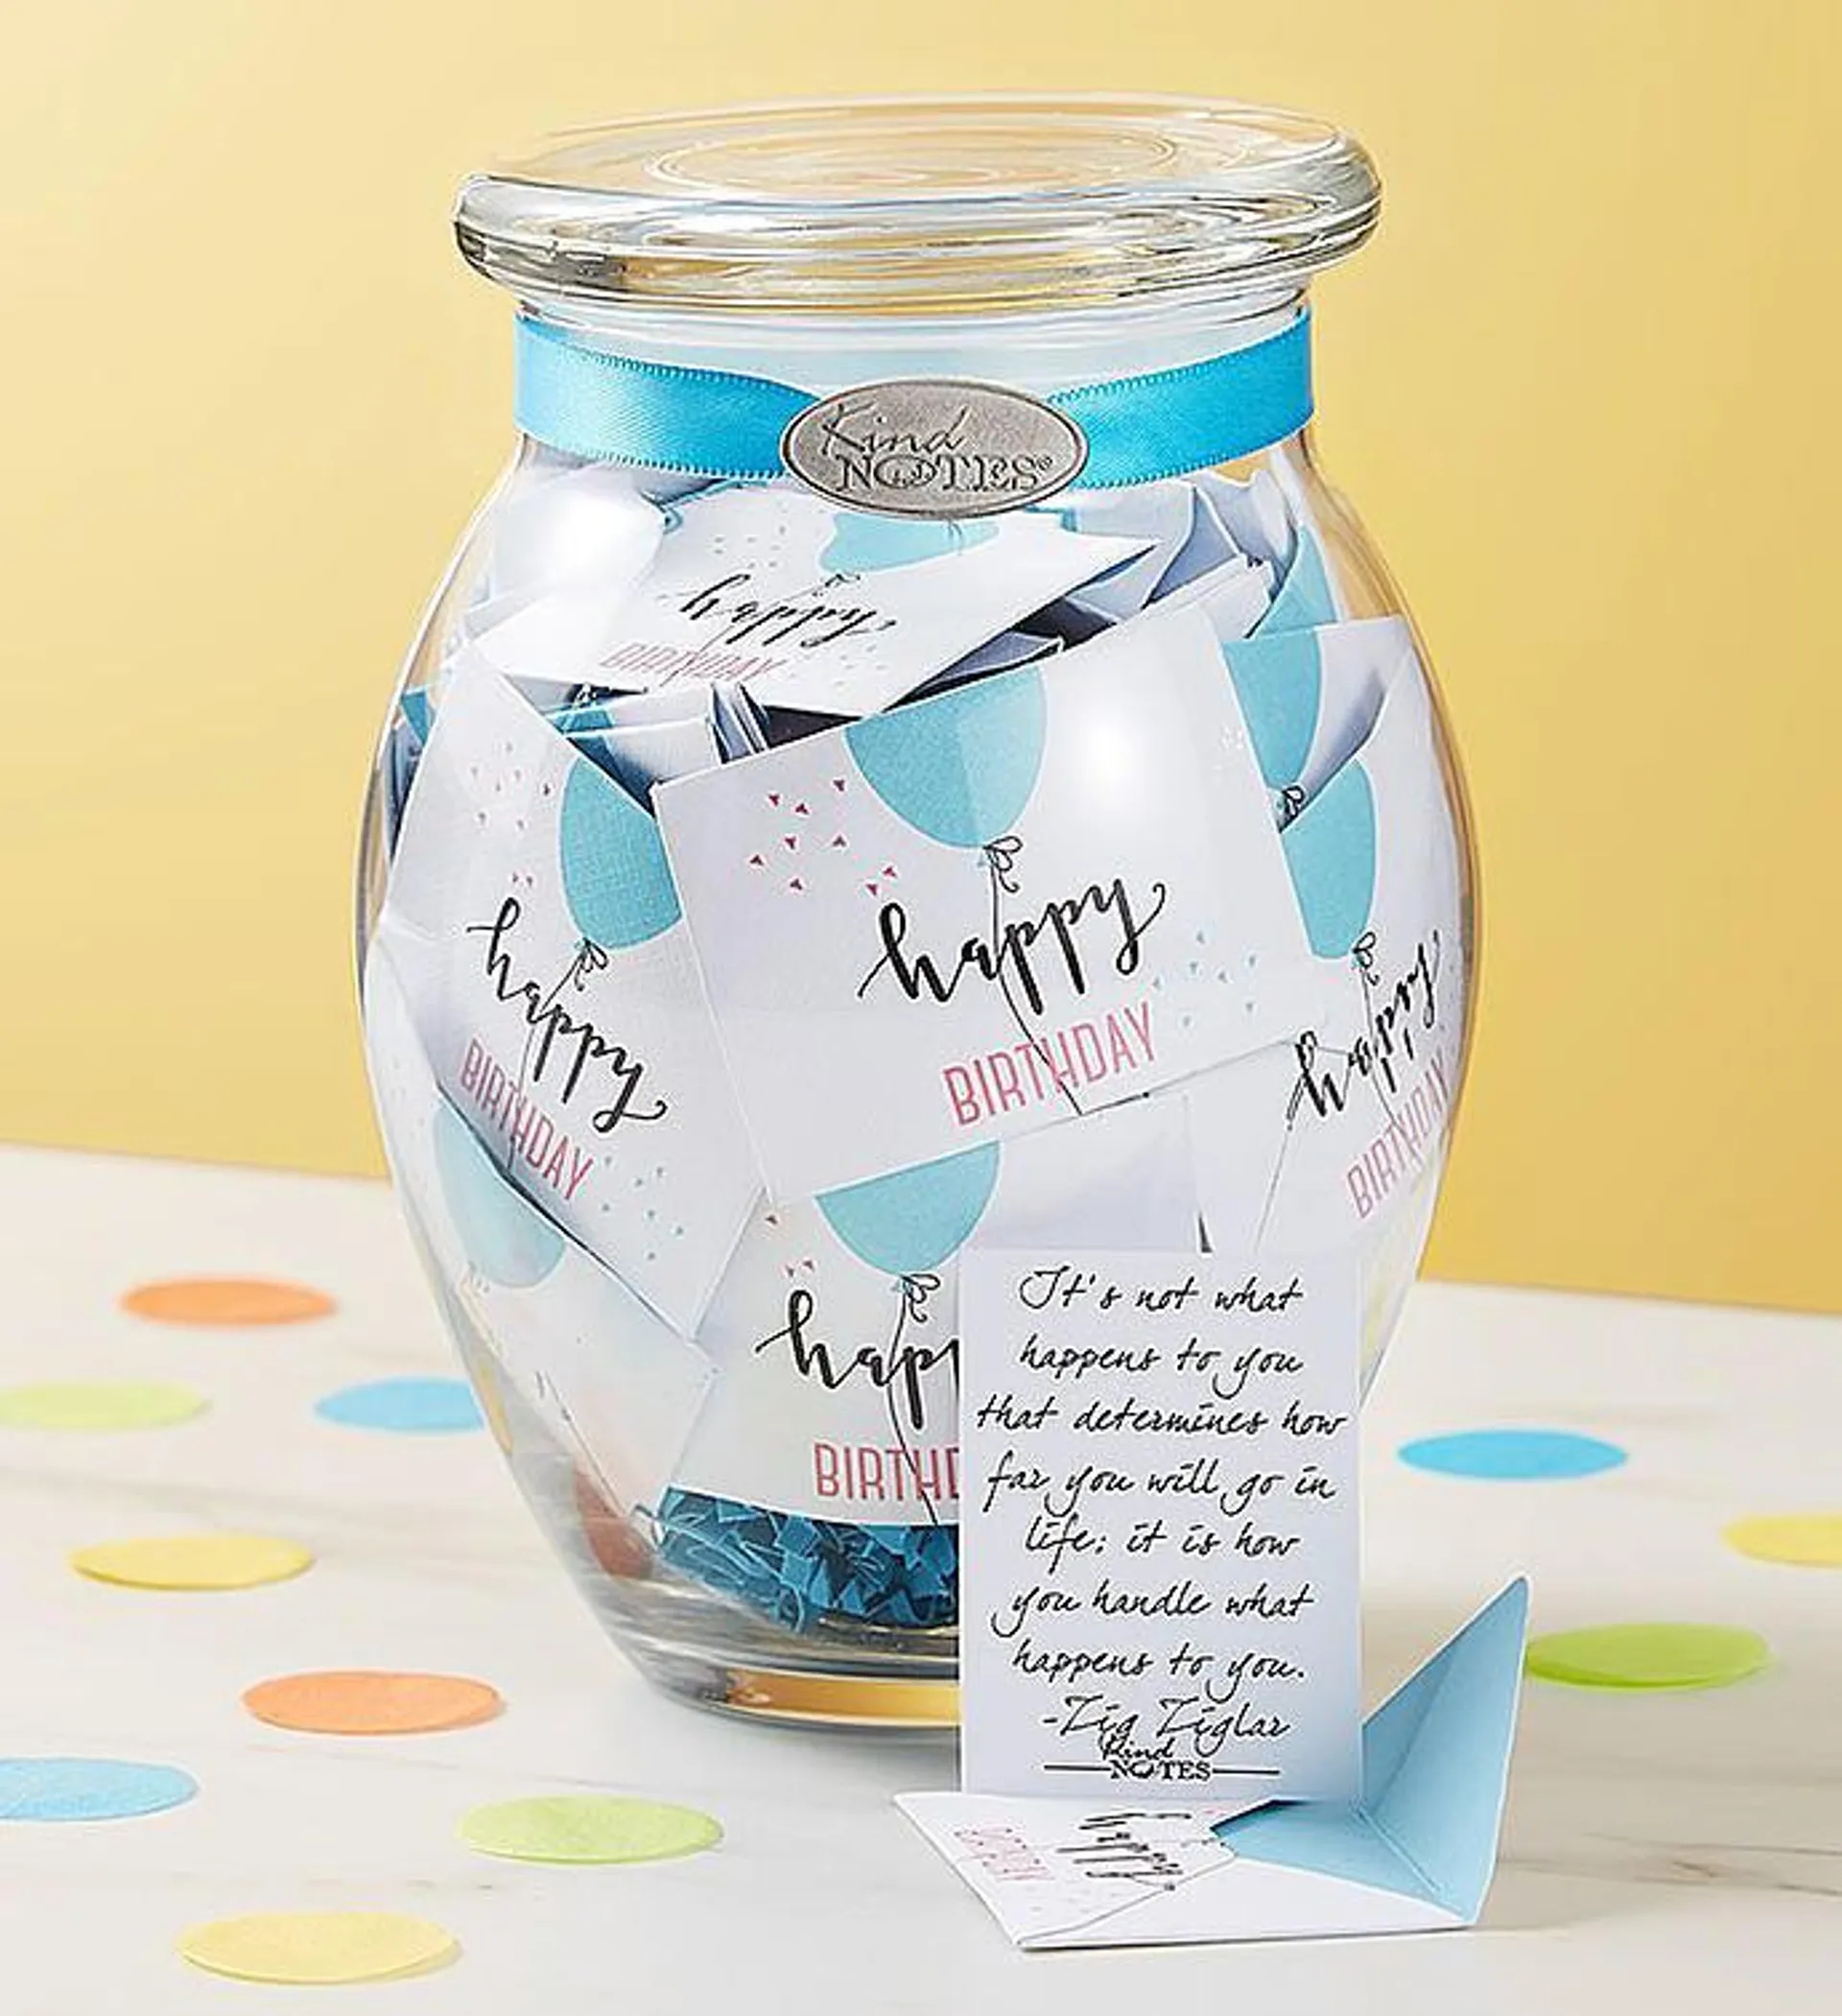 31 Days of Kind Notes ® for Birthday